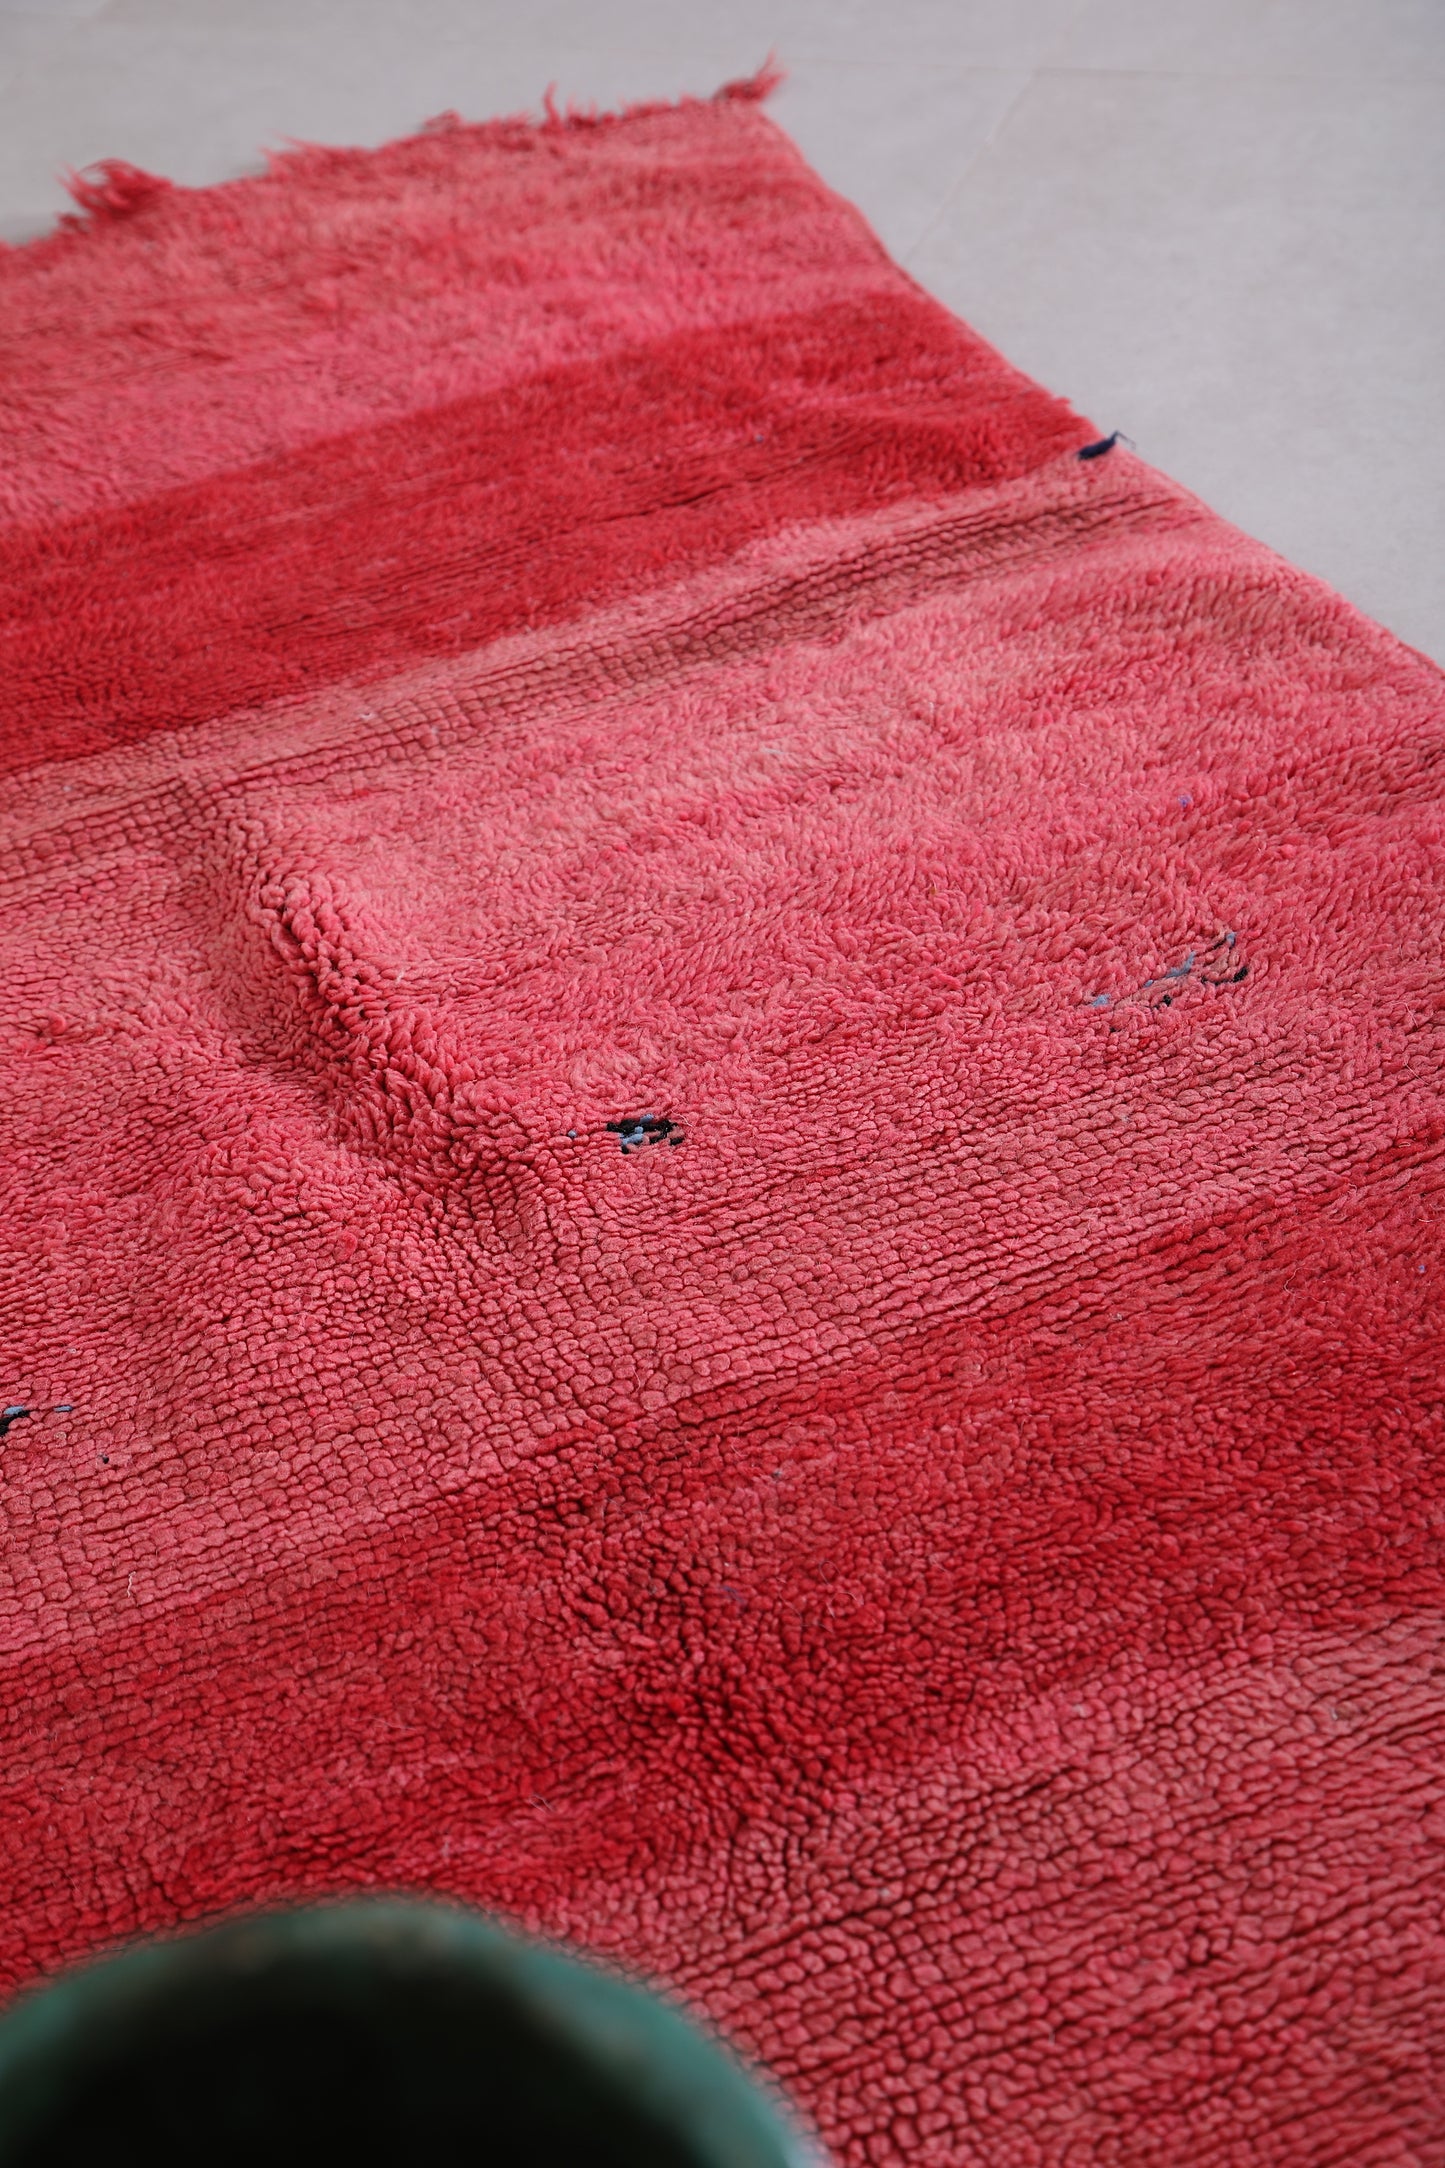 Red Moroccan Rug 3 X 5.6 Feet